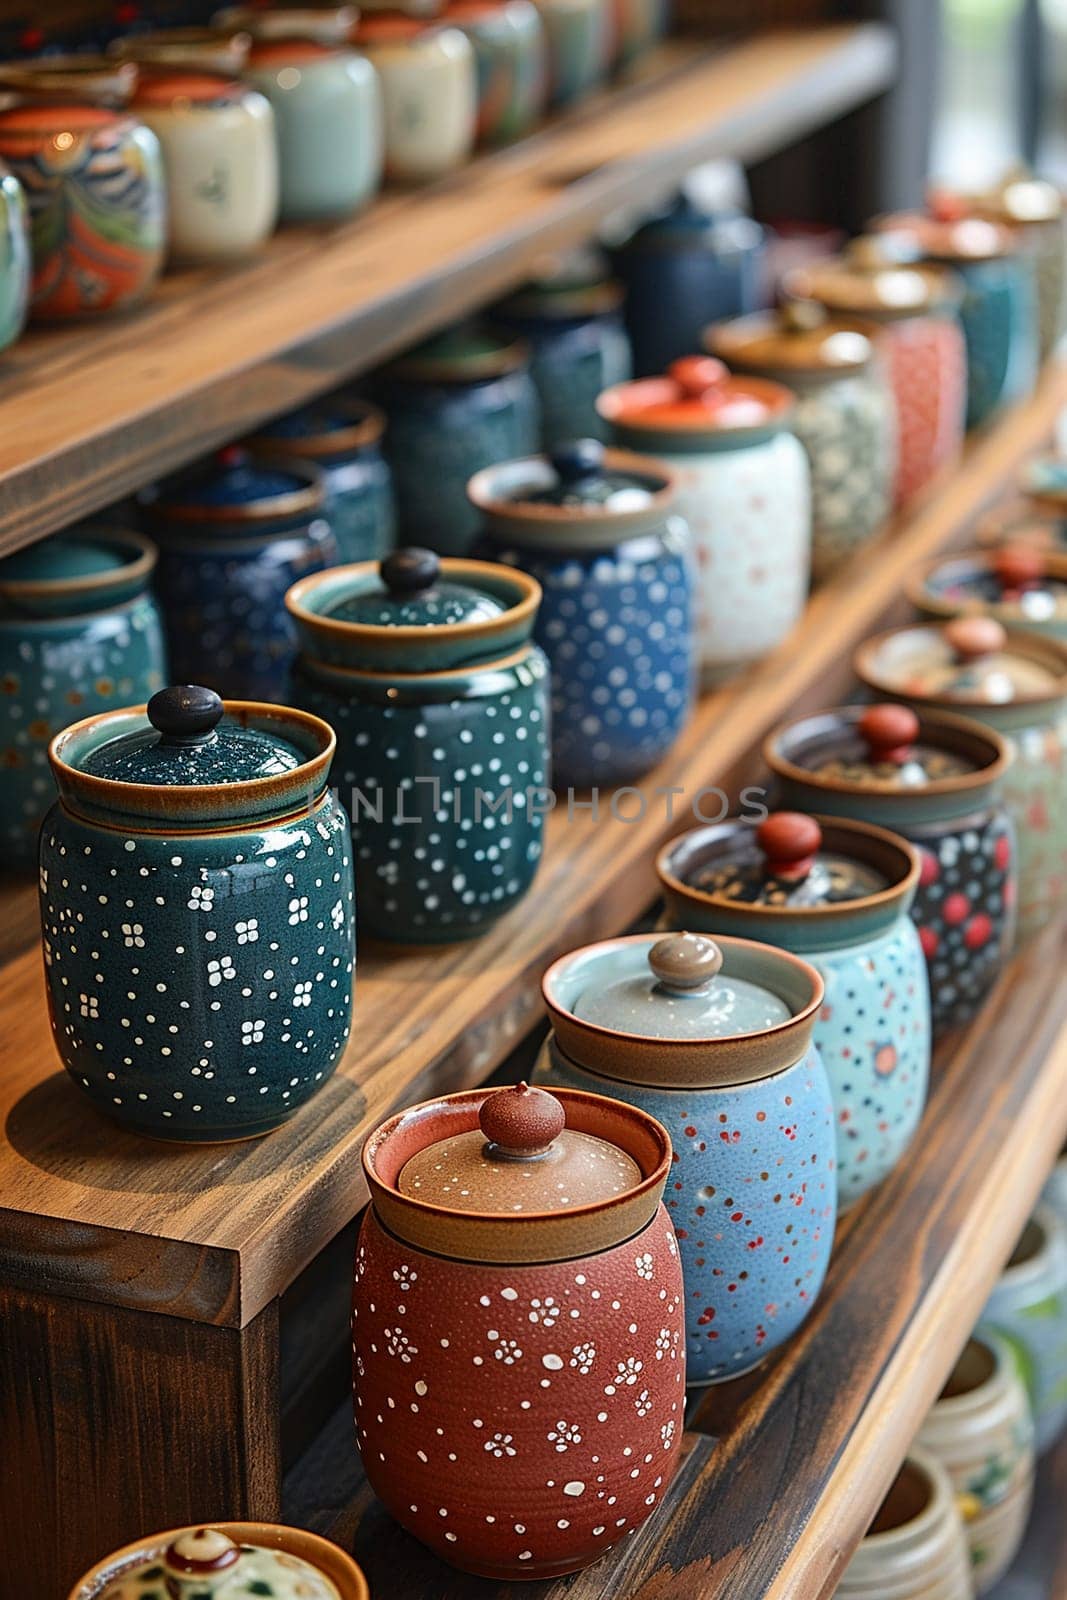 Specialty Tea Shop Pours Serenity in Business of Exquisite Infusions, Tea canisters and ceramic cups pour a story of serenity and tradition in the specialty tea shop business.